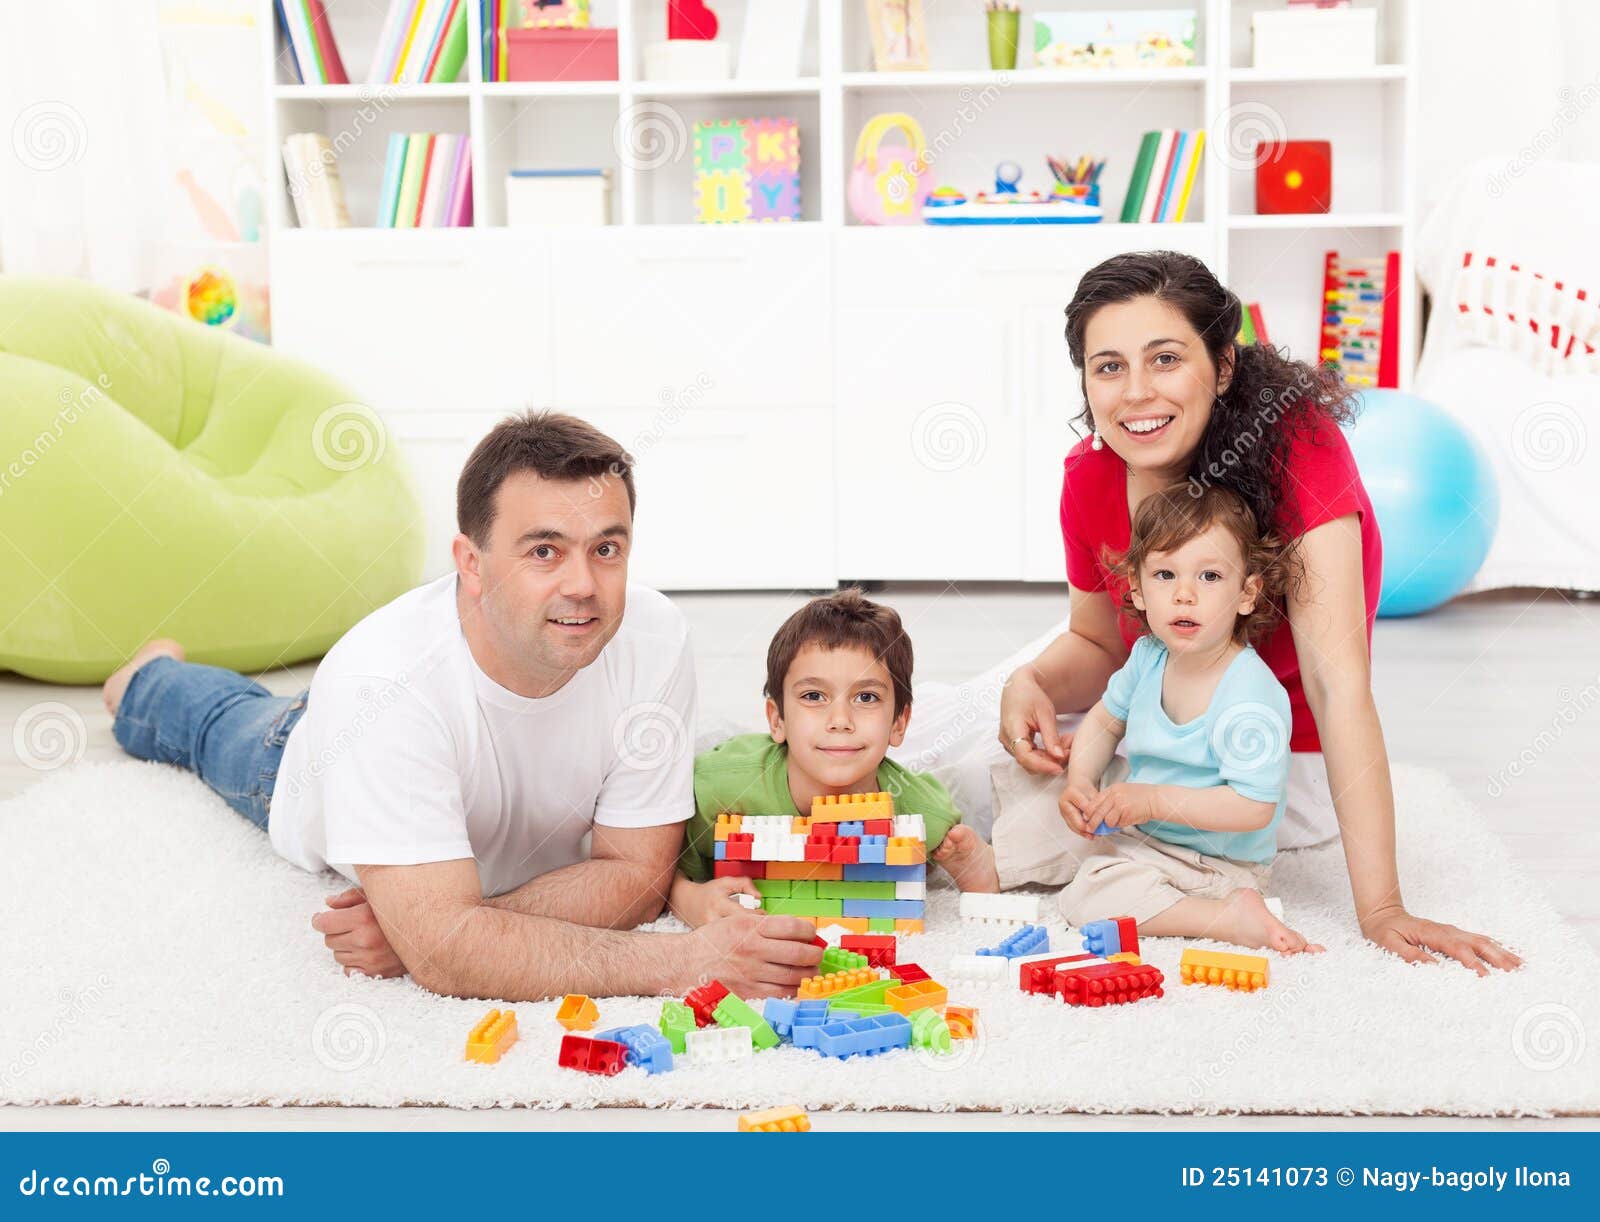 178 061 Family Time Photos Free Royalty Free Stock Photos From Dreamstime